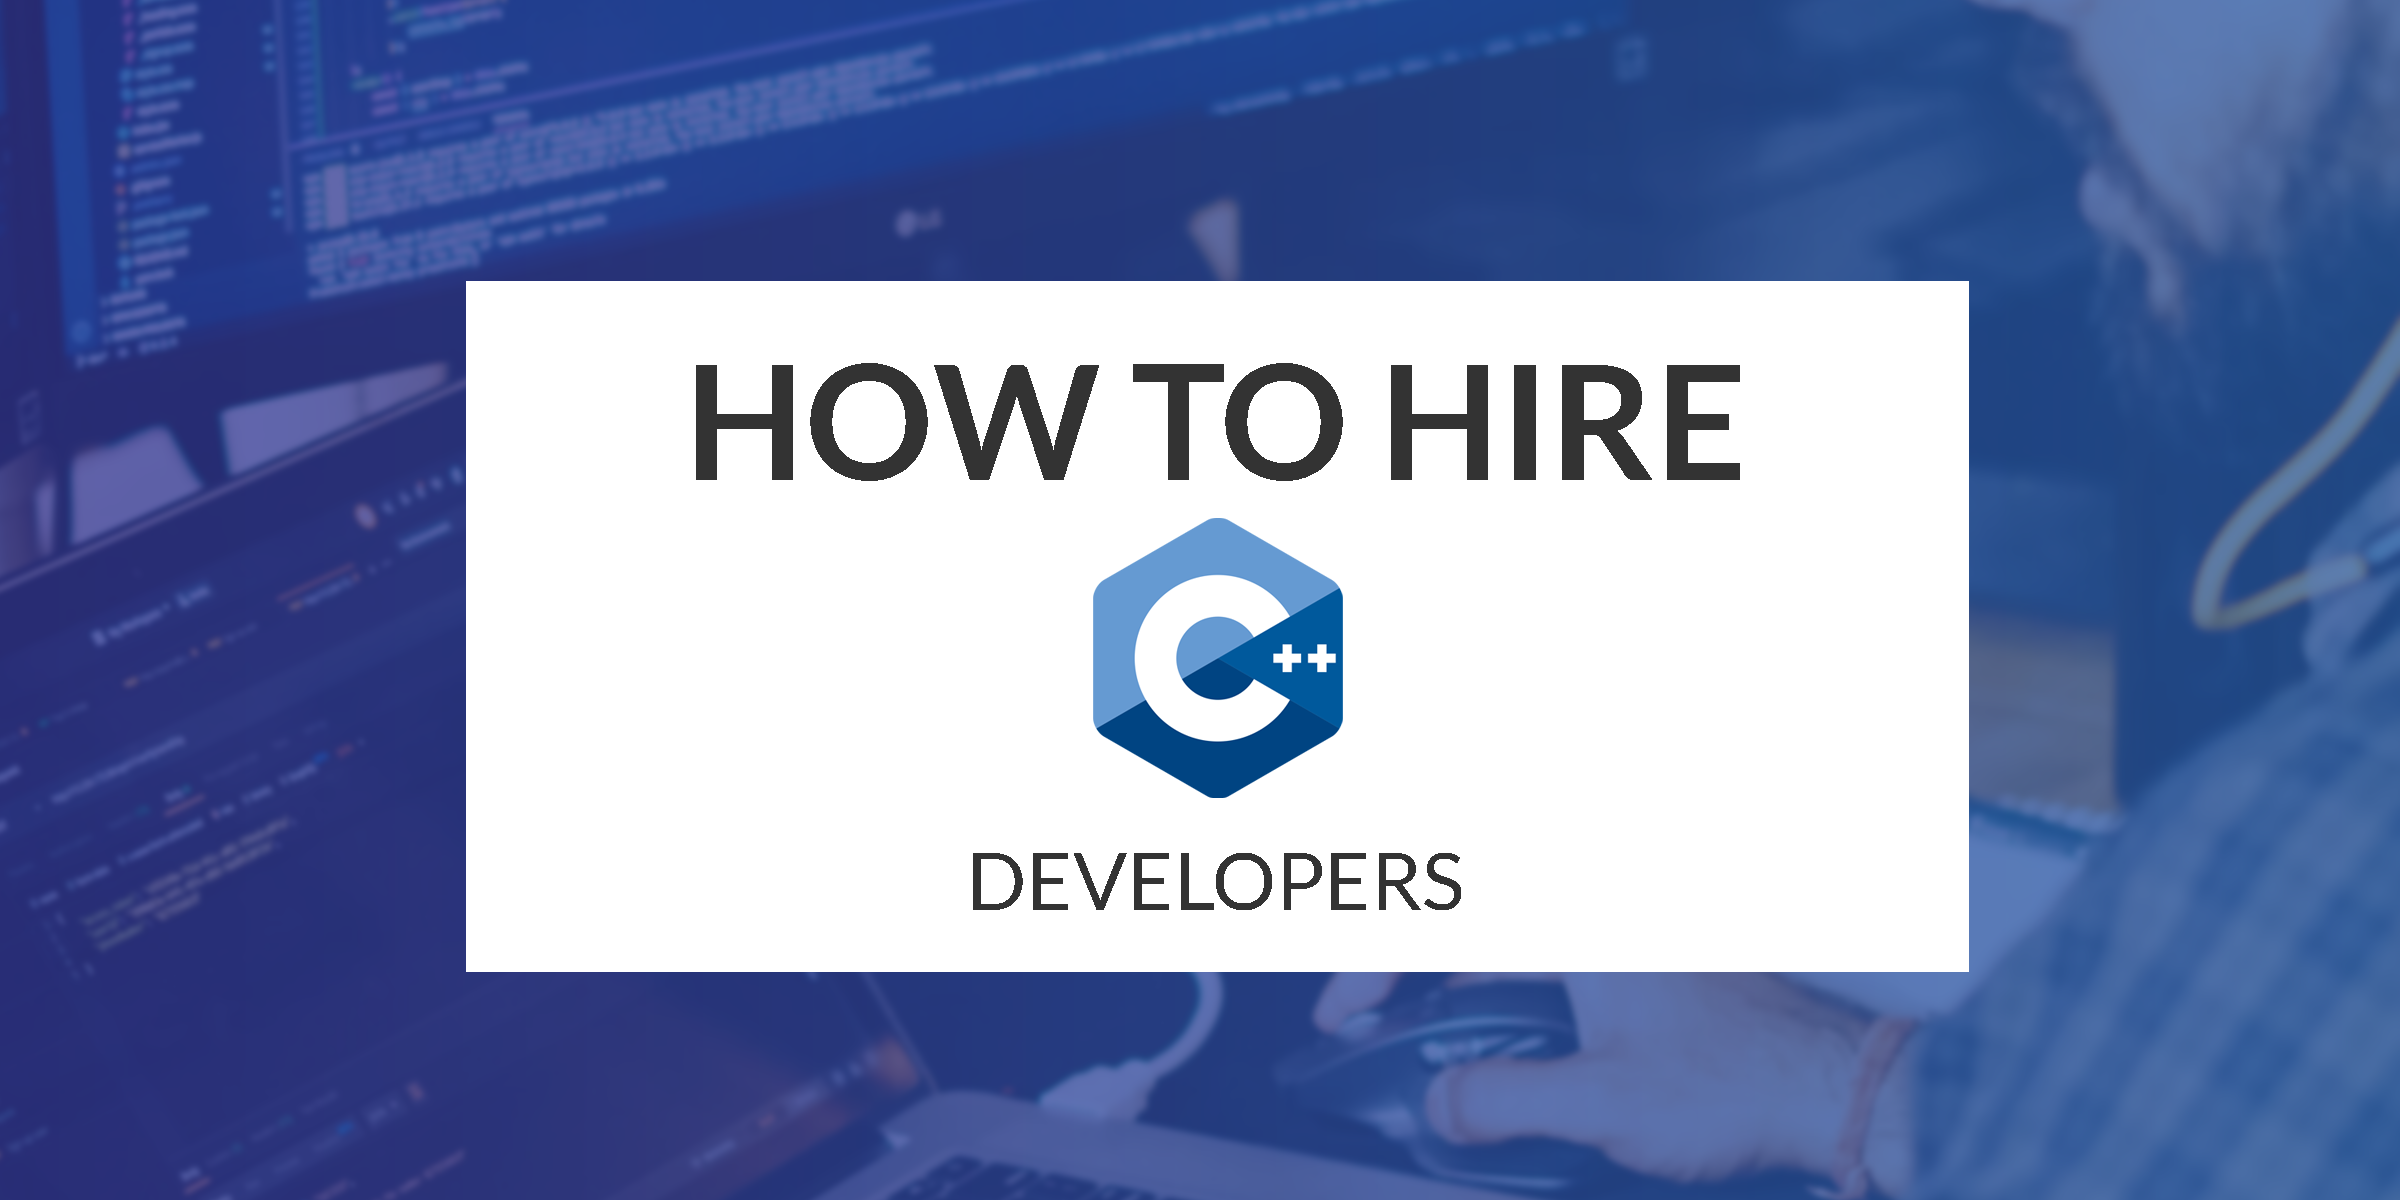 How to Hire C++ Developers